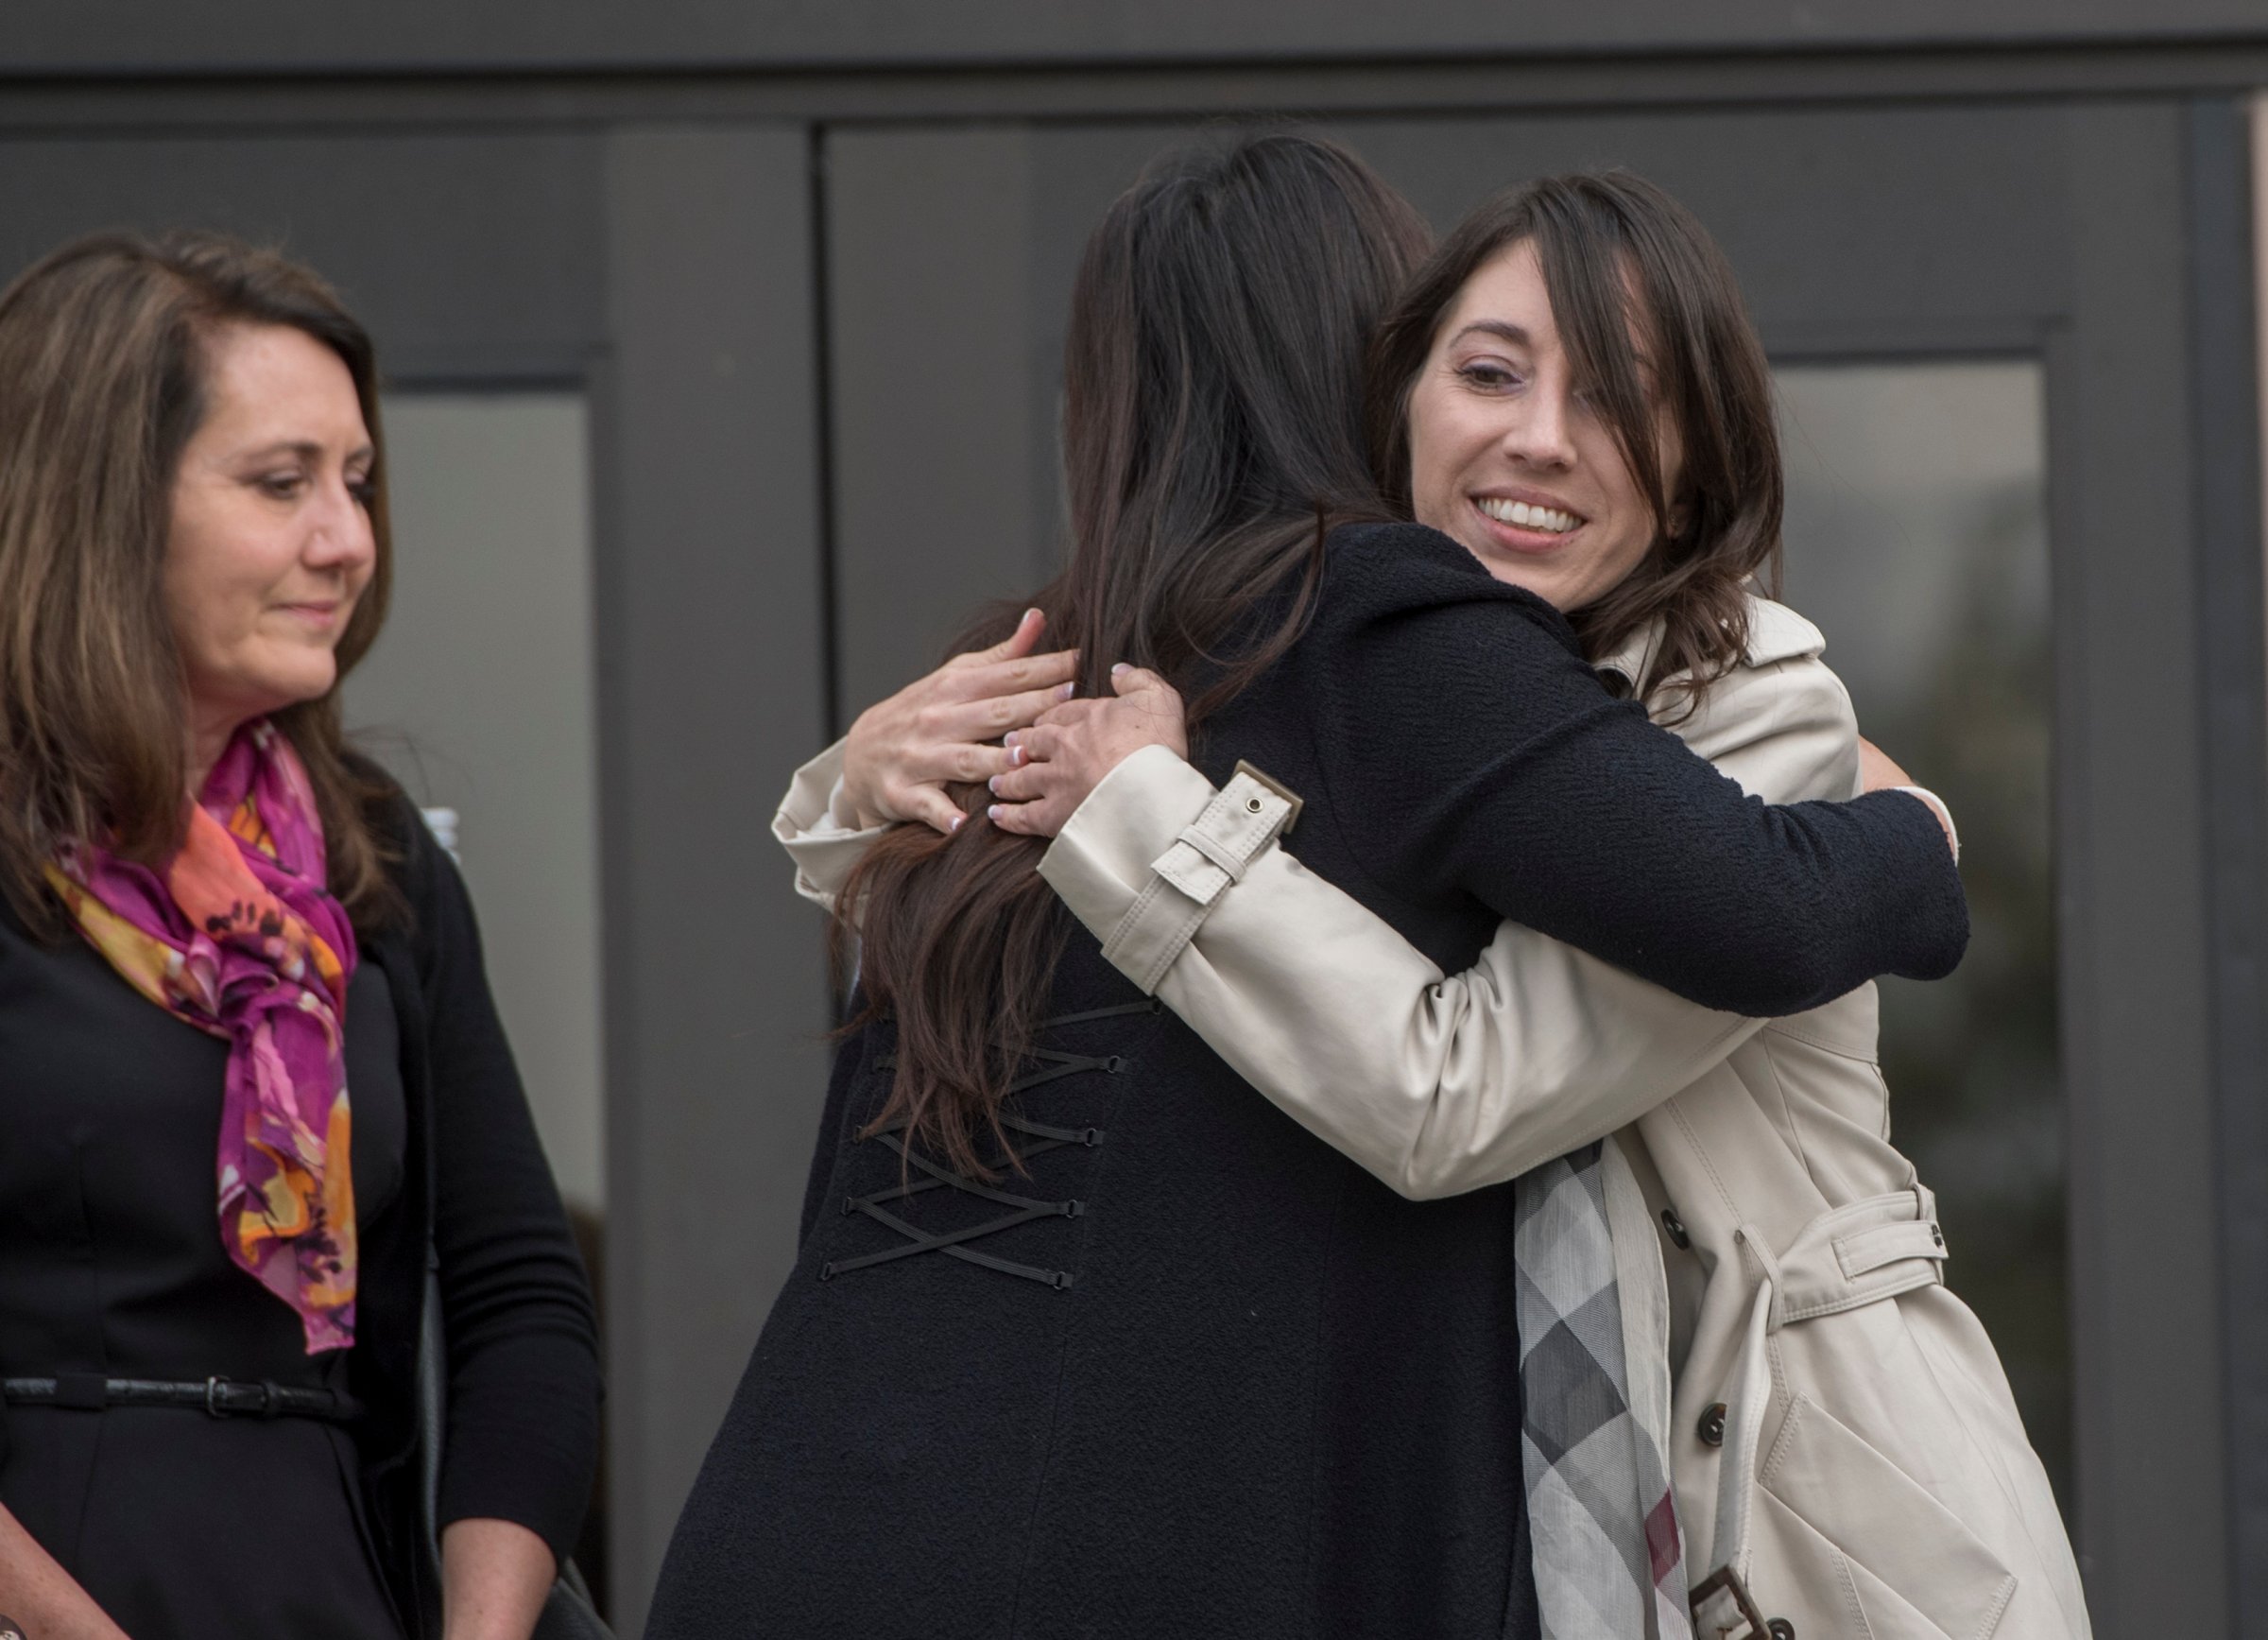 Michelle Susan Hadley, right, hugs Orange County District Attorney Chief of Staff Susan Kang Schroeder after being cleared of all charges in a complicated plot to frame her in Fullerton, Calif., on Jan. 9, 2017.